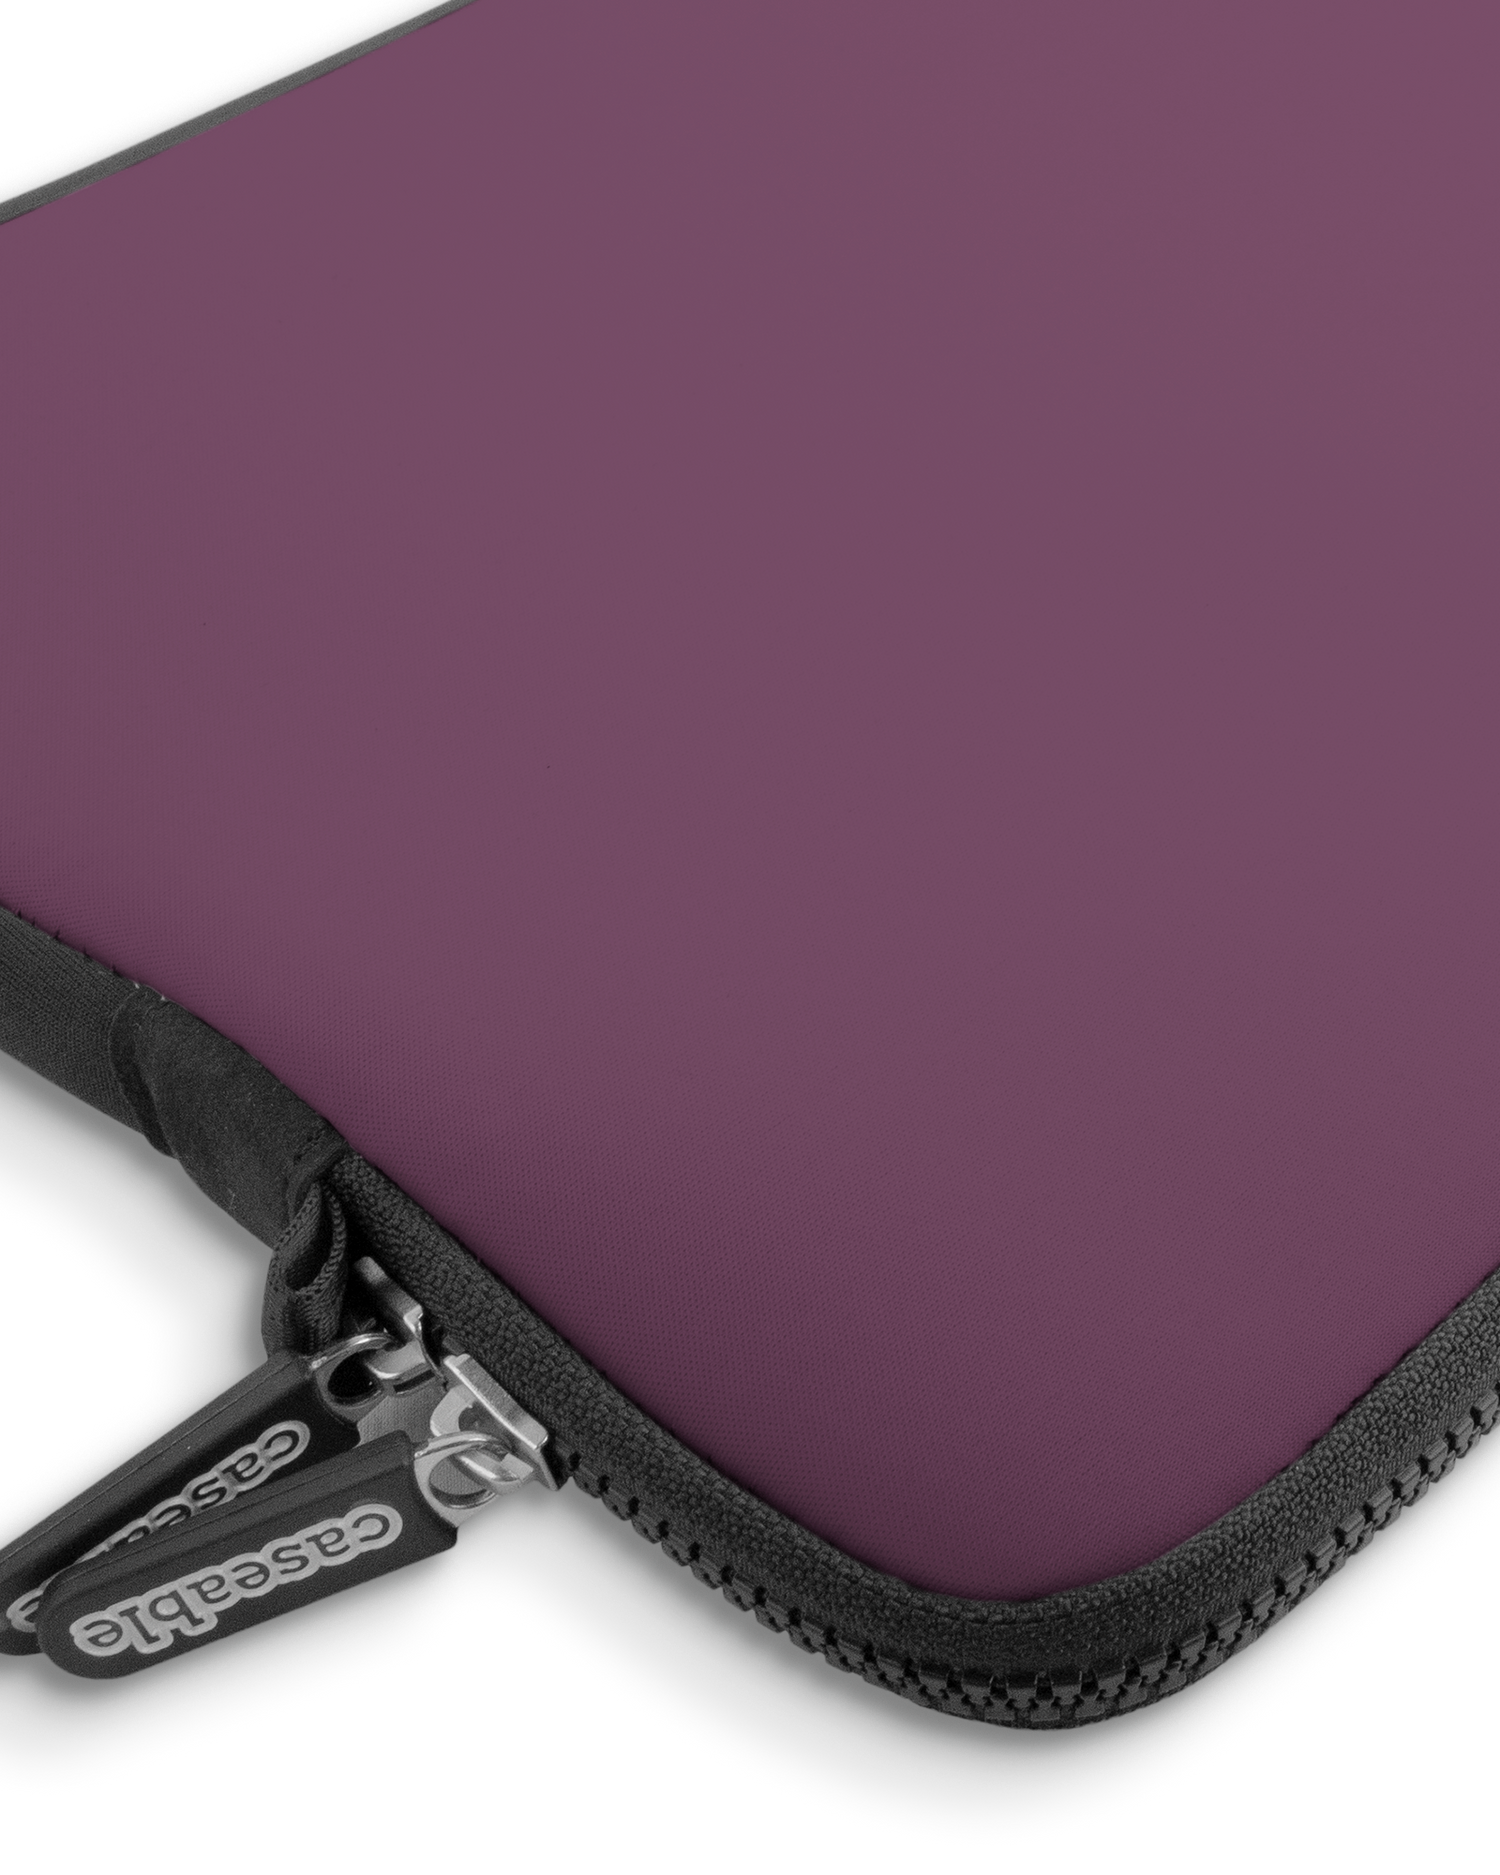 PLUM Premium Laptop Bag 13-14 inch with device inside